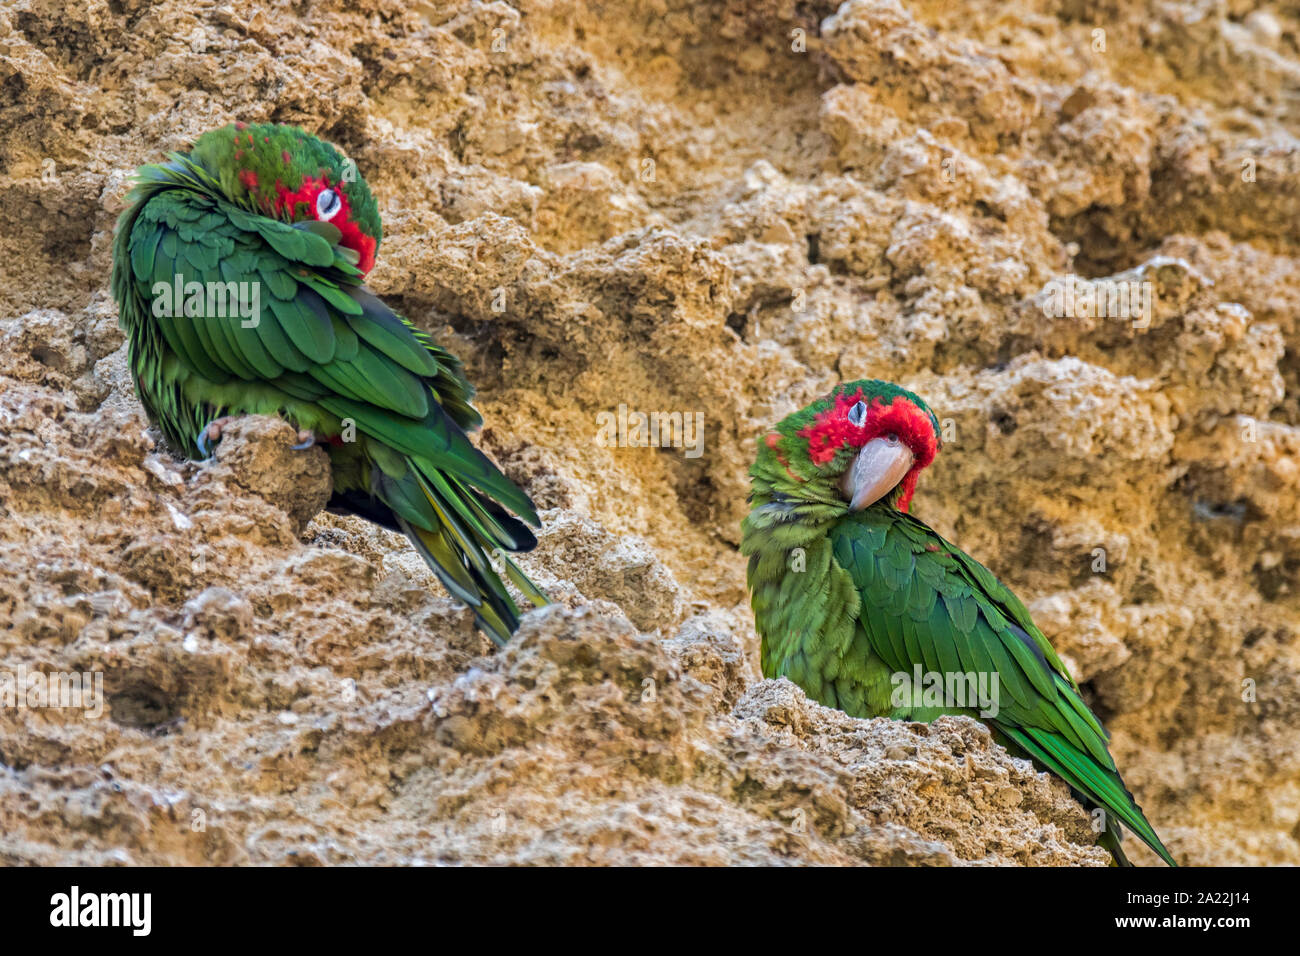 Mitred parakeets / mitred conures (Psittacara mitratus) sleeping in rock face, native to South American Andes from Peru through Bolivia to Argentina Stock Photo